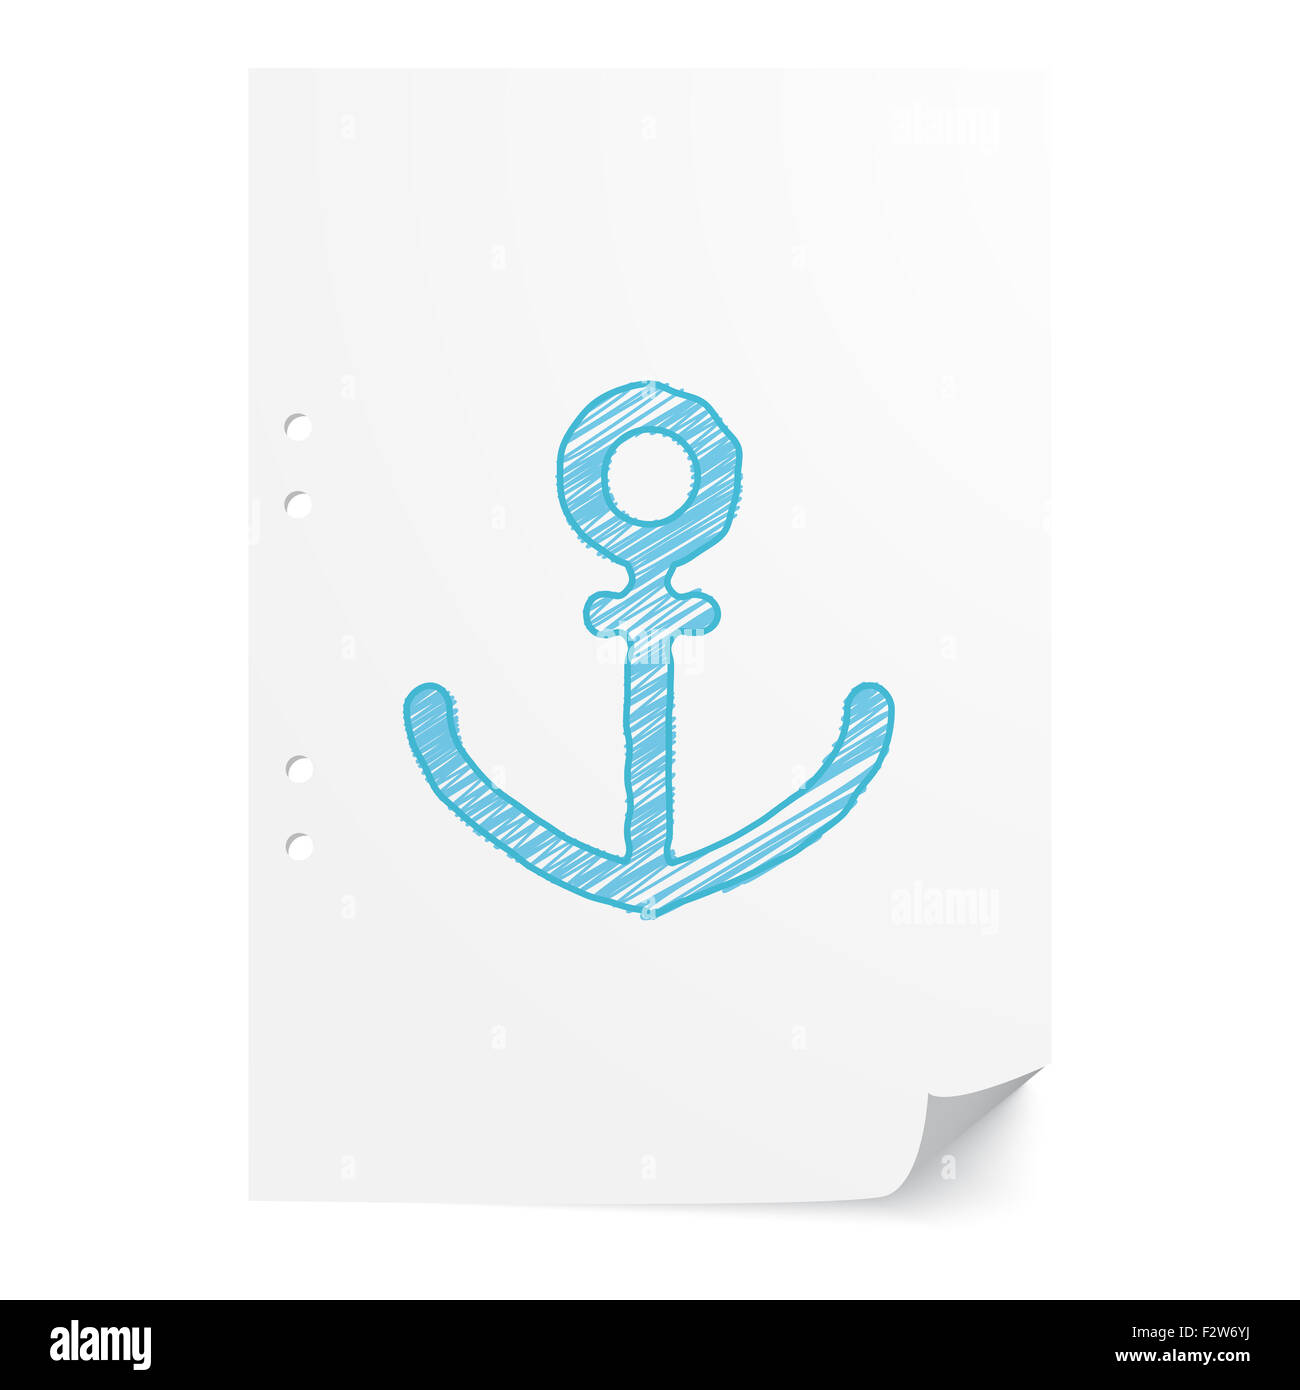 Blue handdrawn Anchor illustration on white paper sheet with copy space Stock Photo